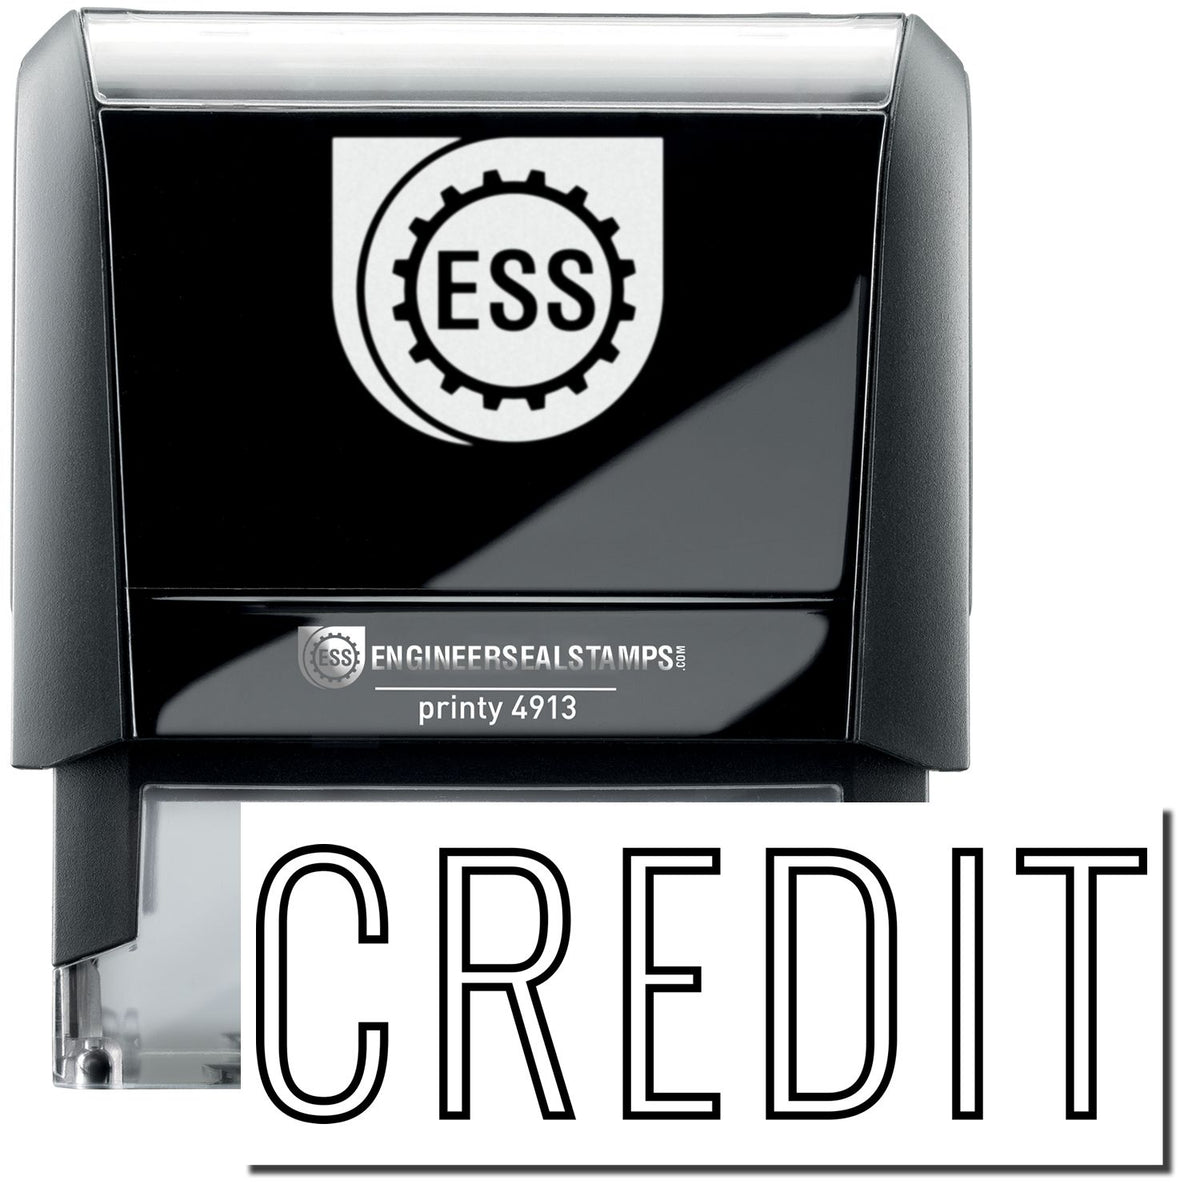 A self-inking stamp with a stamped image showing how the text &quot;CREDIT&quot; in a large outline style is displayed by it after stamping.